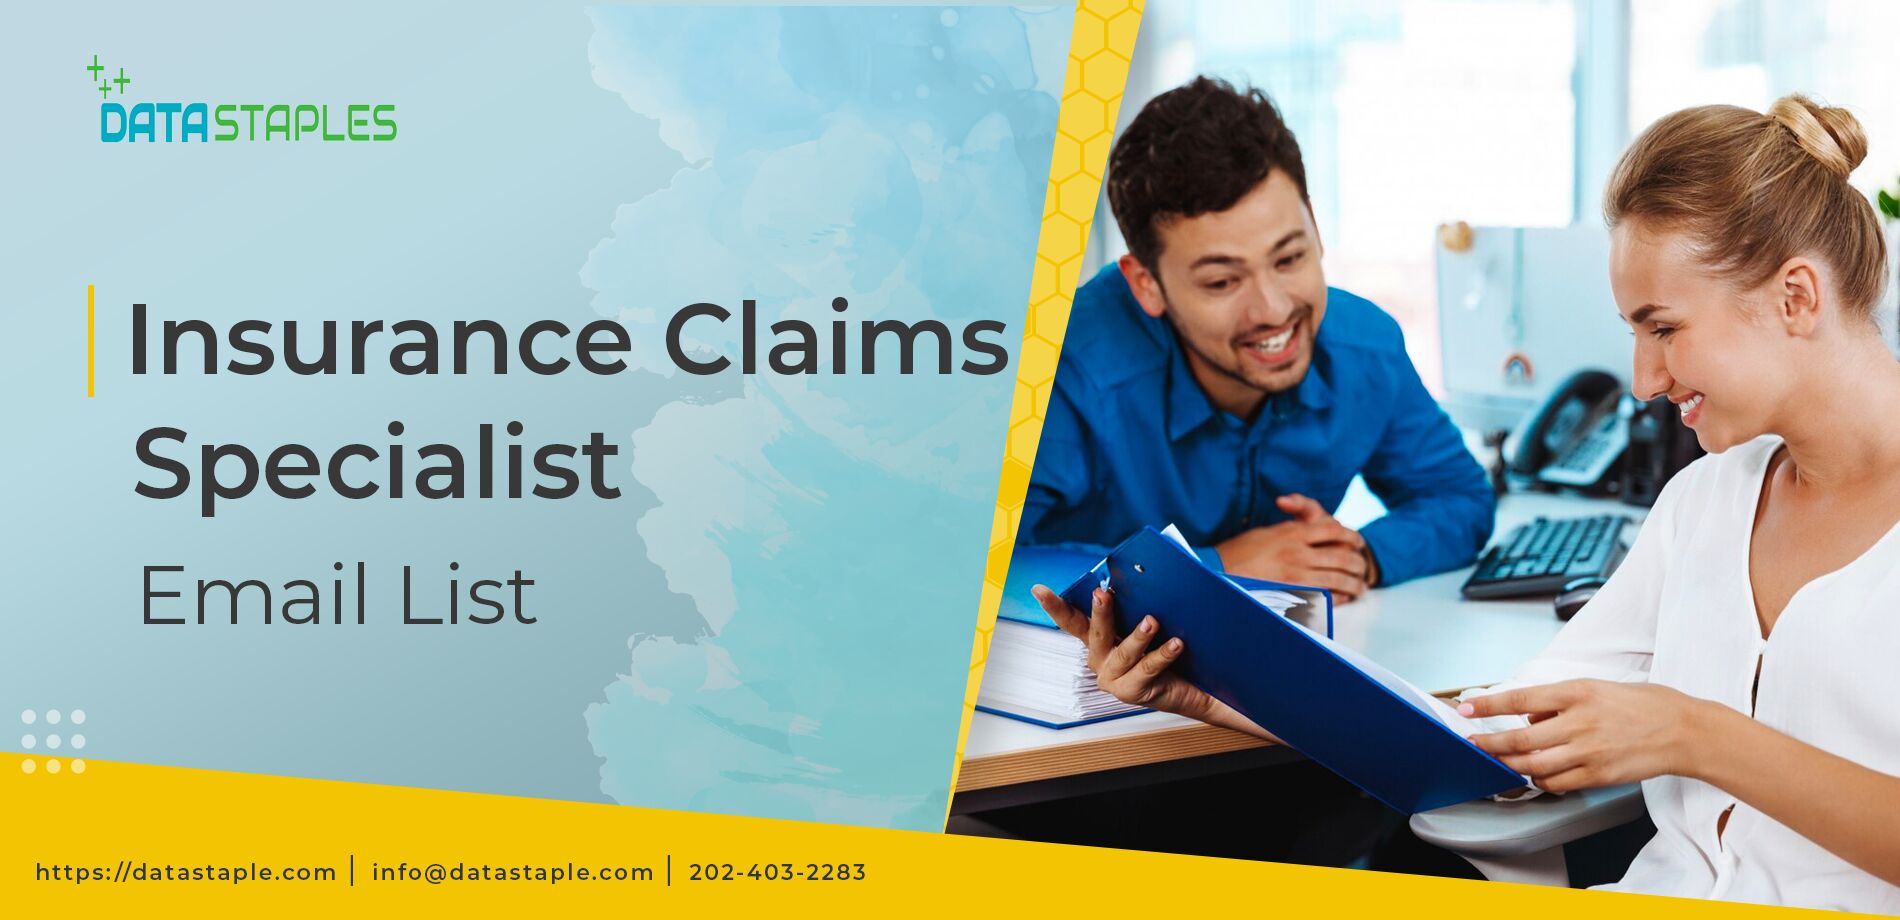 Insurance Claims Cpecialist Email List | DataStaples